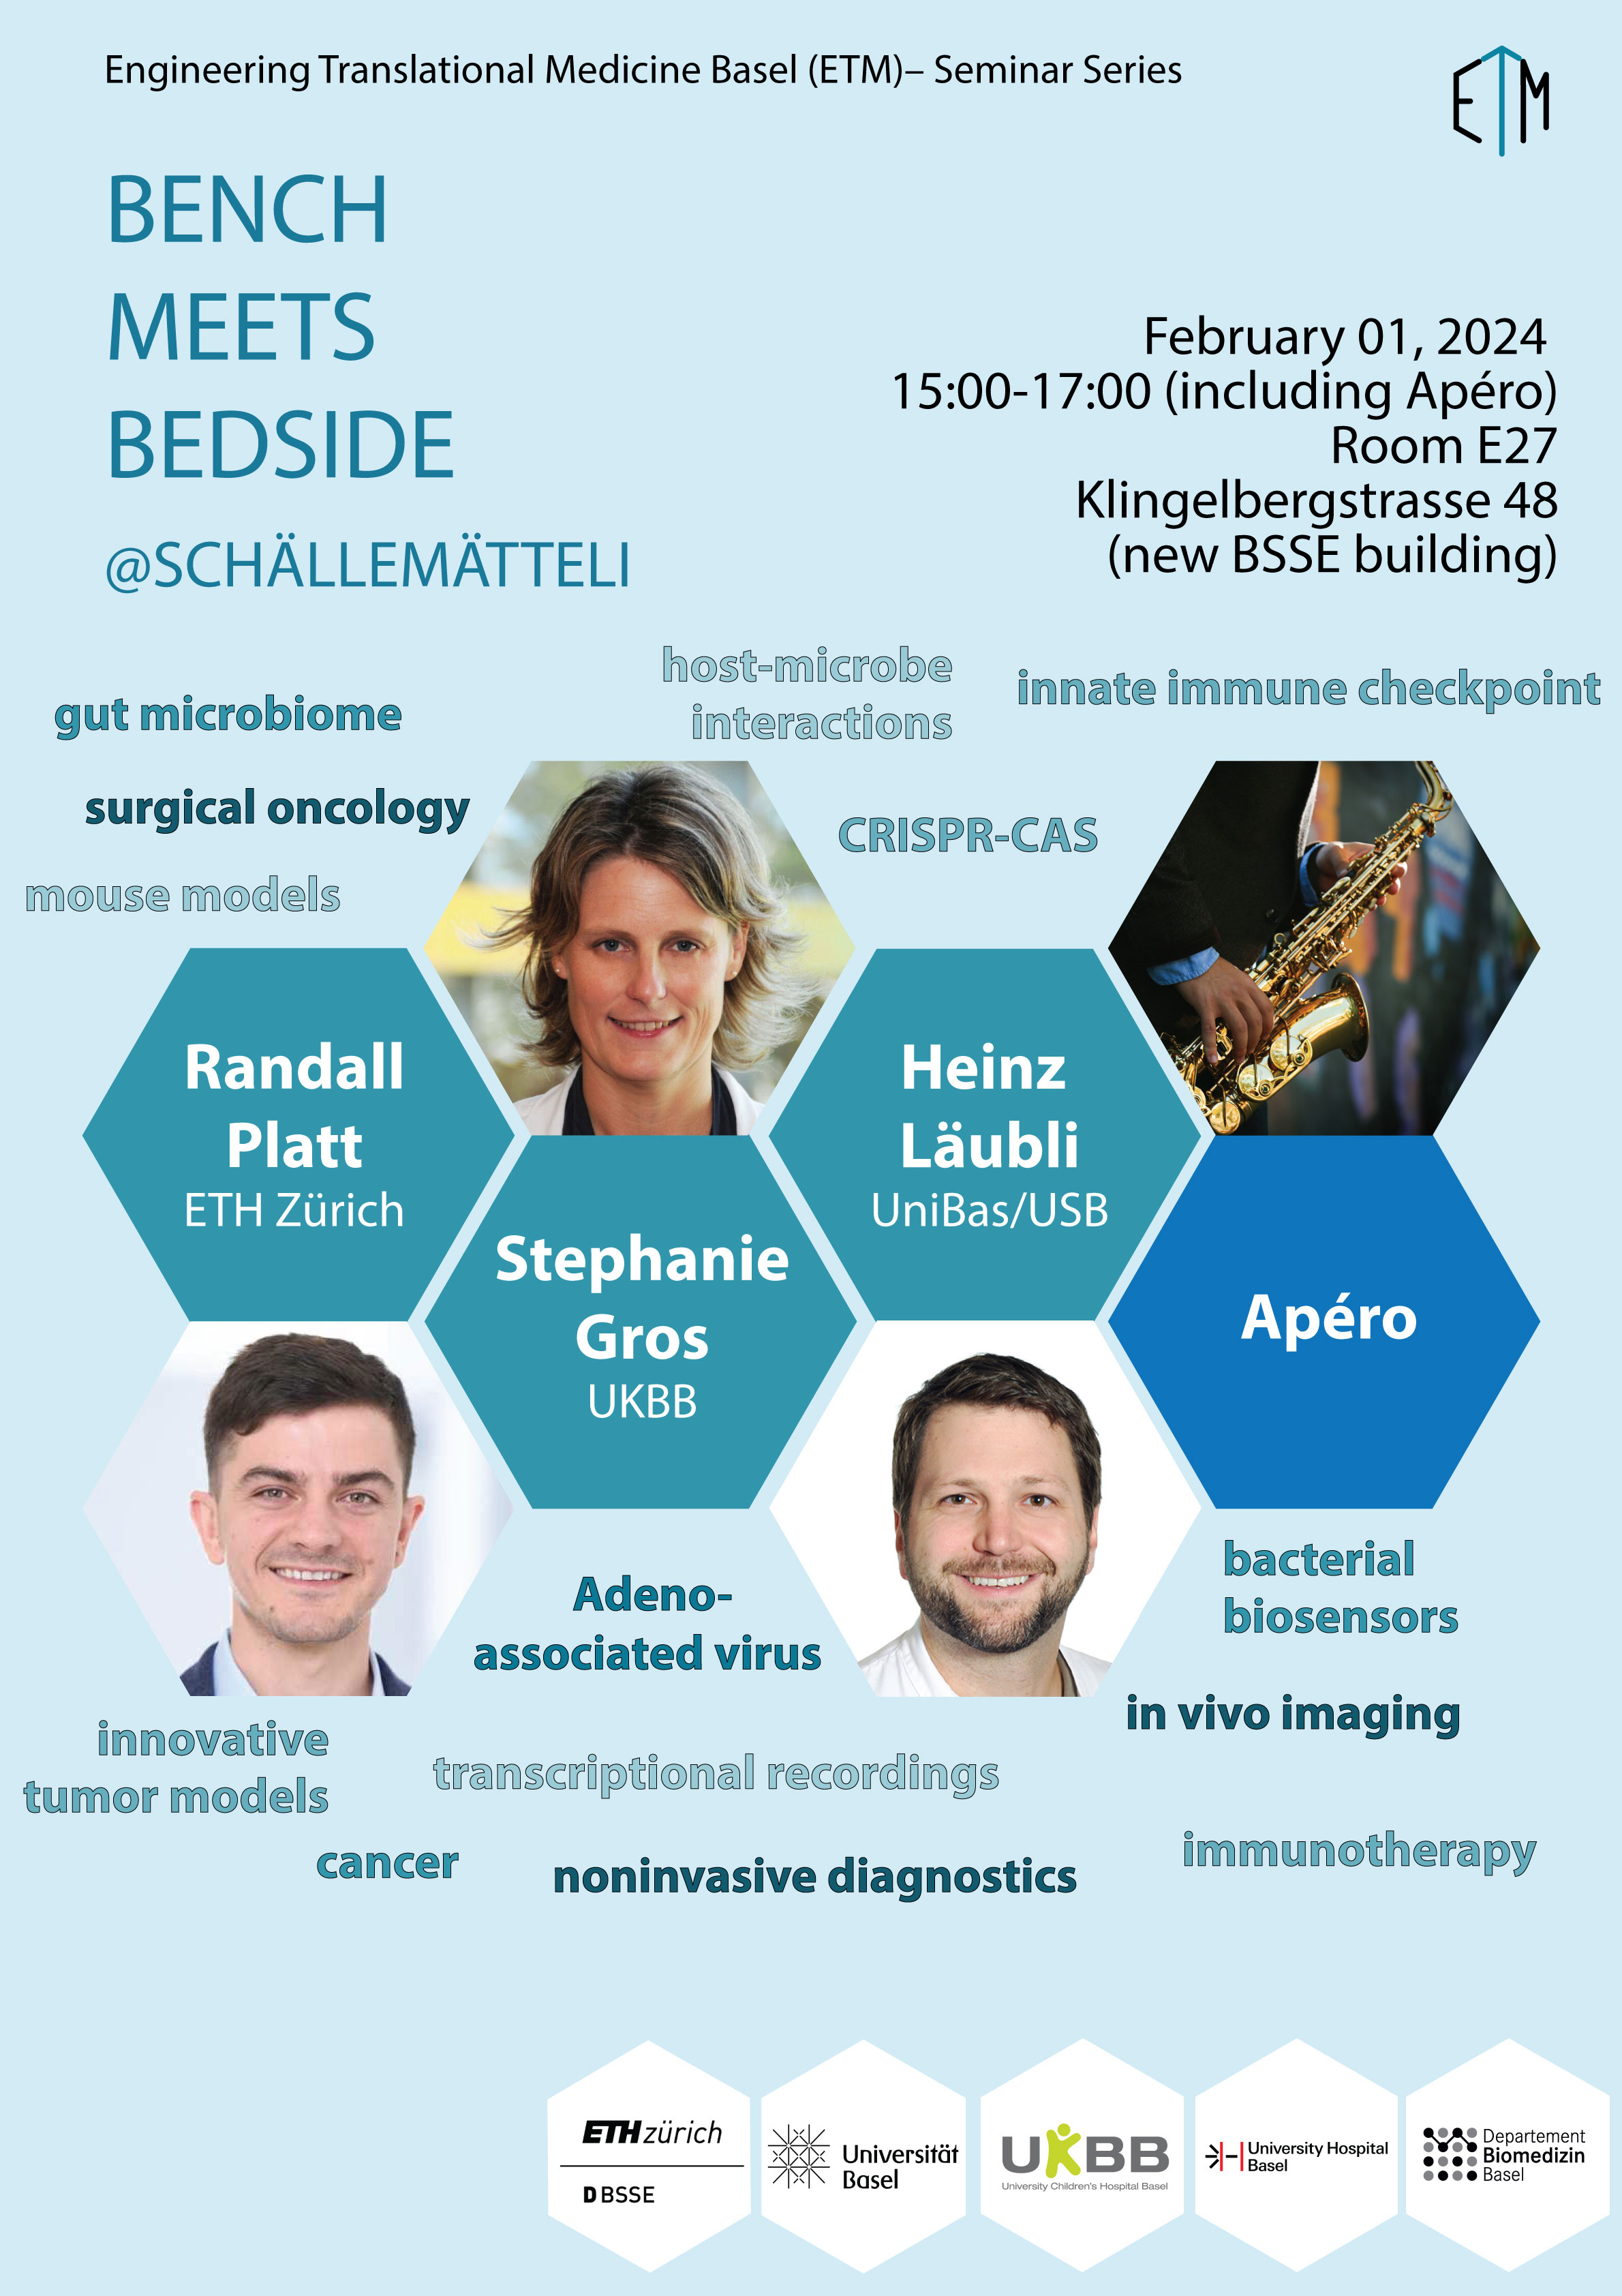 Poster of the ETM seminar with pictures of the speakers and keywords of their talks